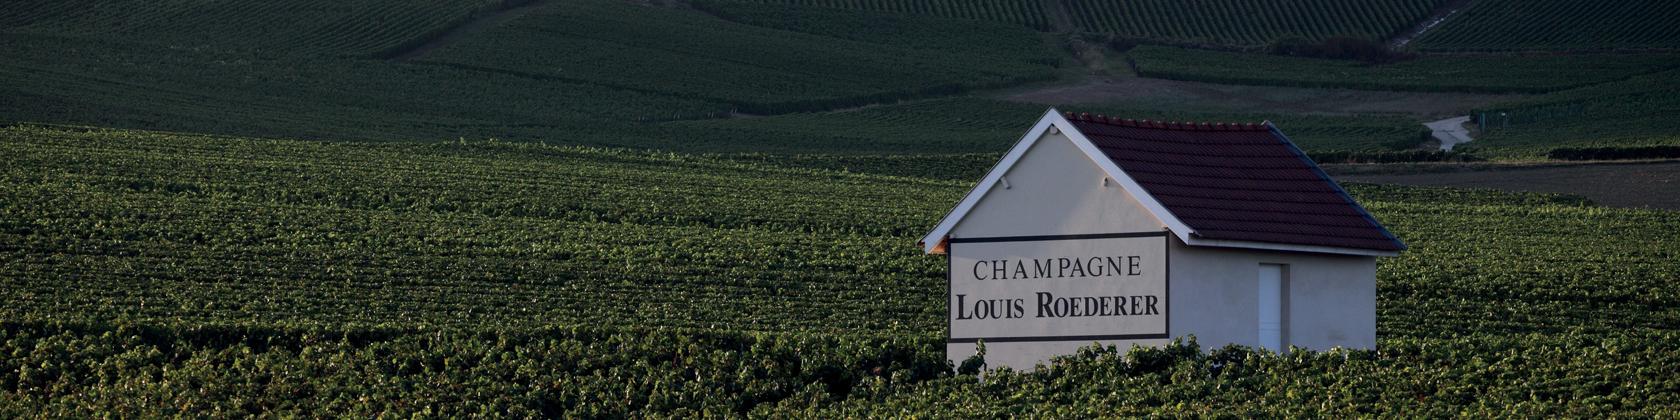 Champagne LOUIS ROEDERER: Weinberge